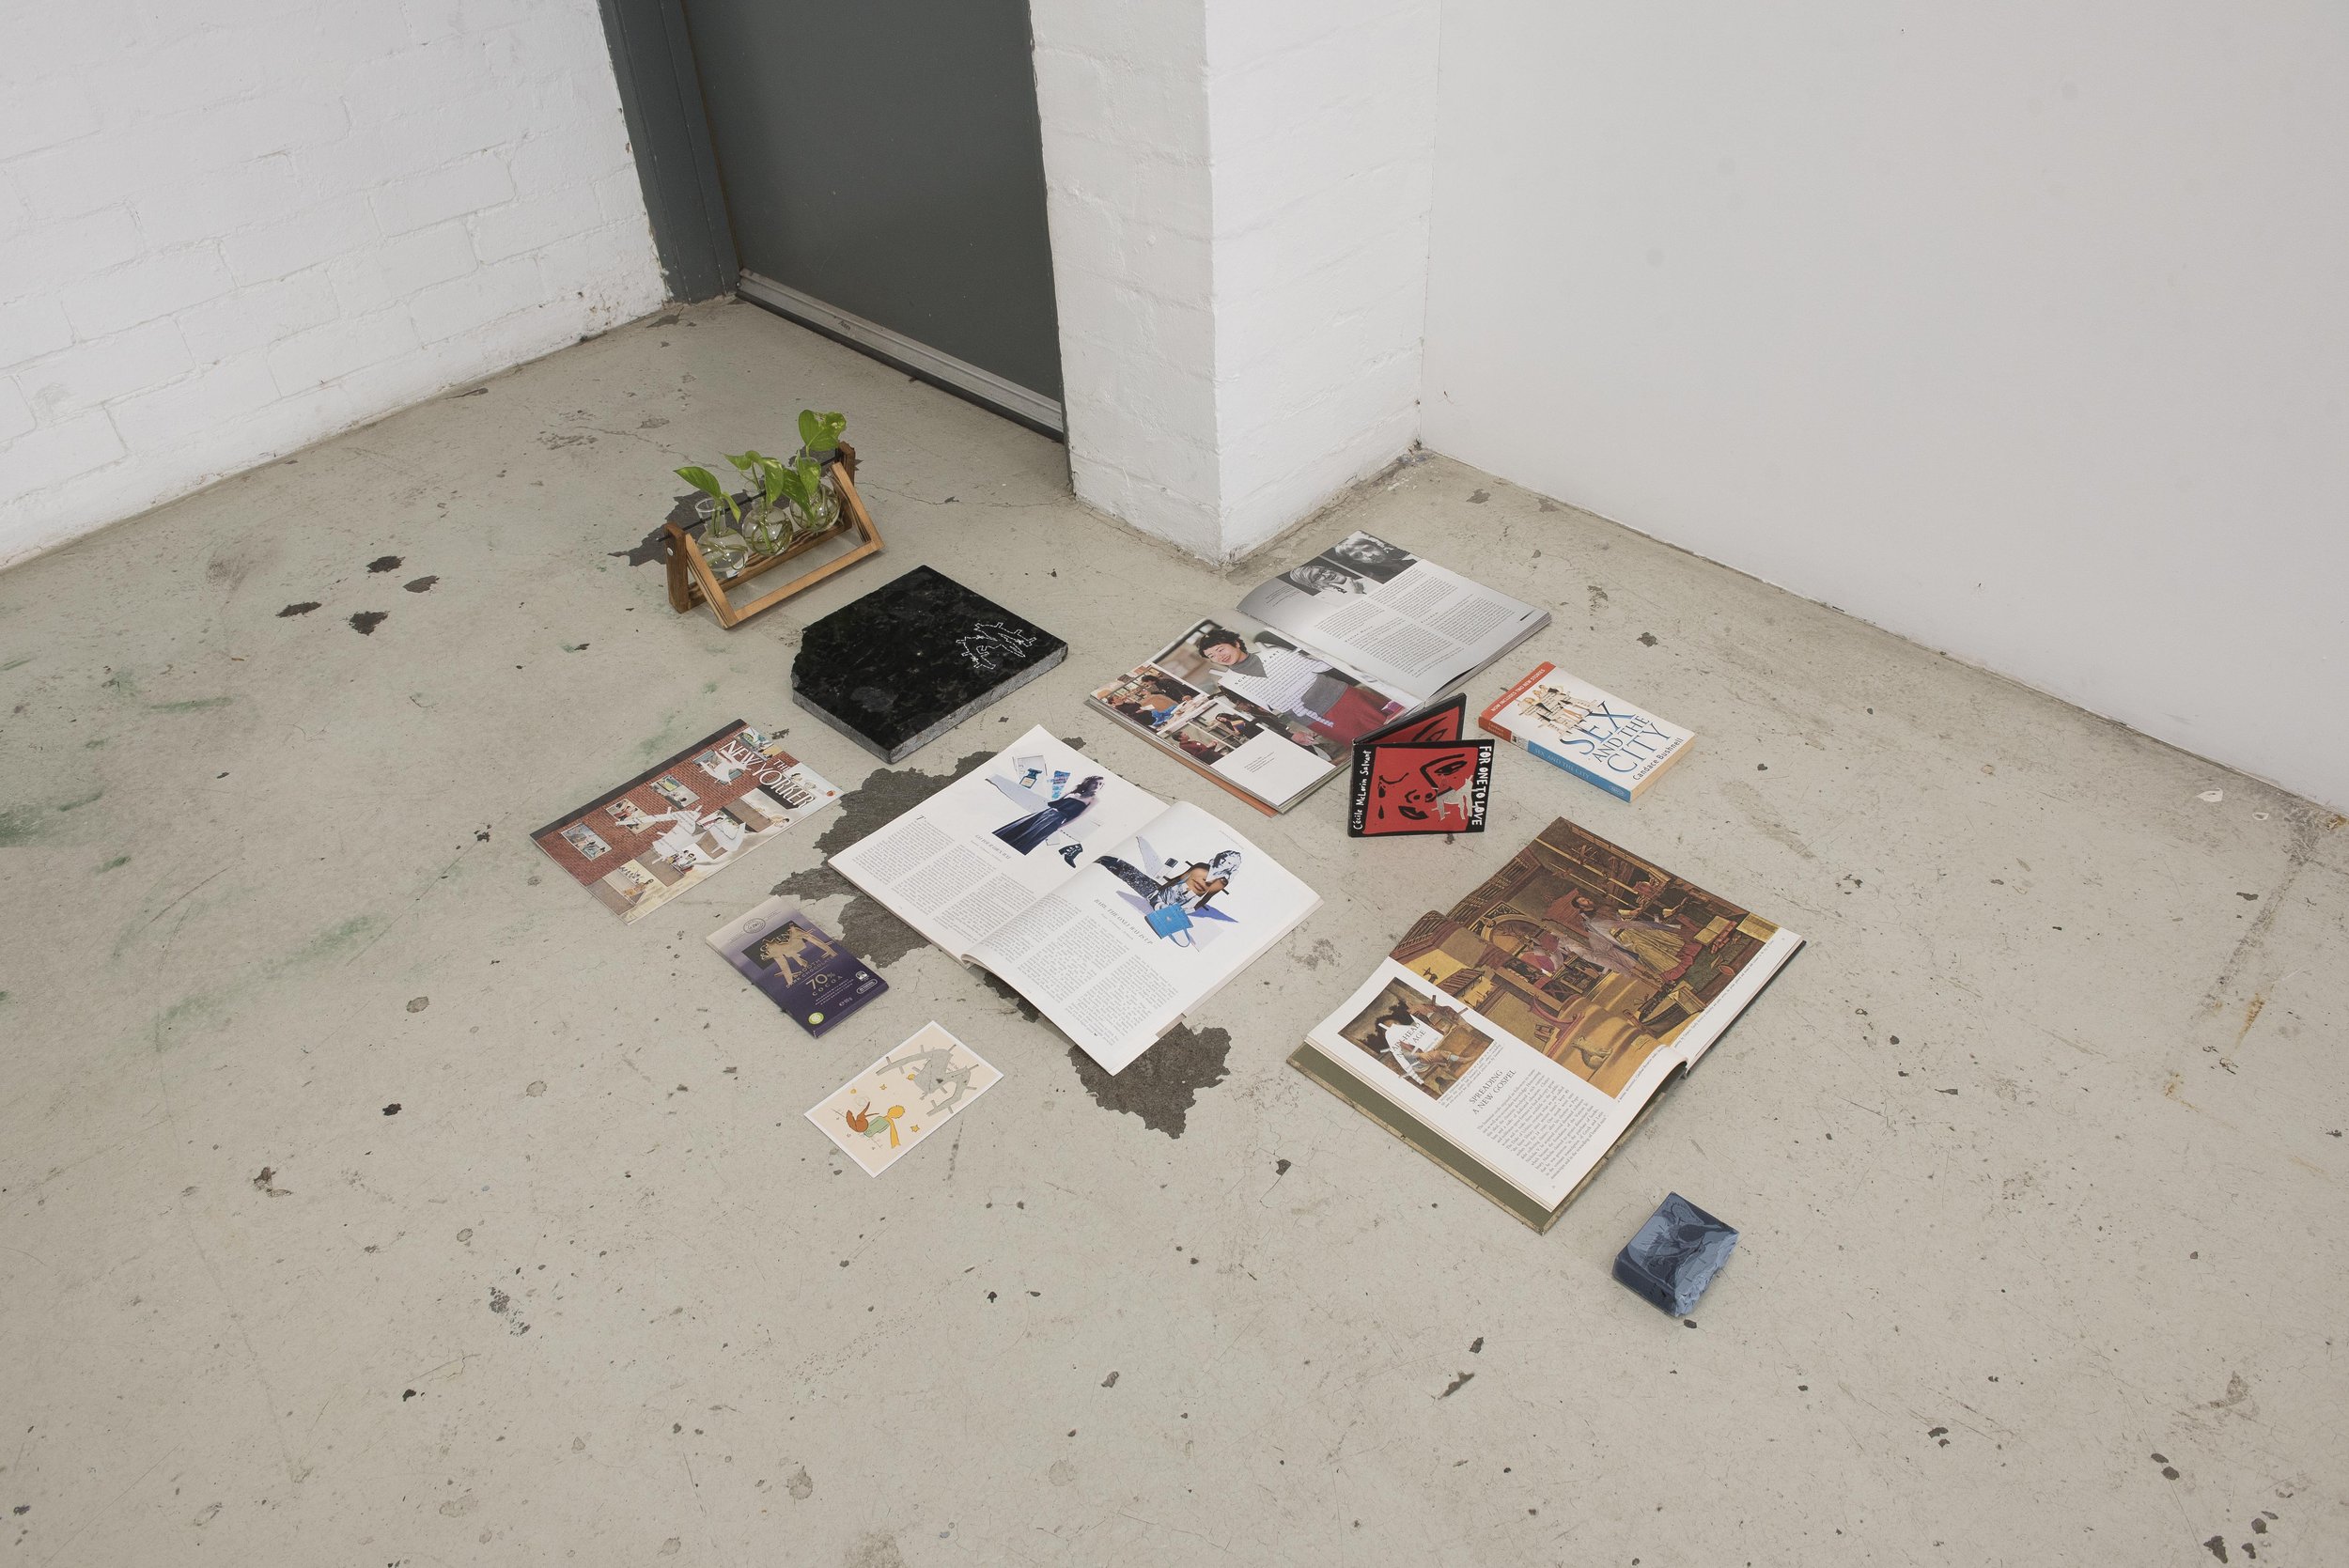   just encase , 2021    Installation (floor piece and throughout gallery space) - books, magazines, stone tile, devil’s ivy, card, CD case, soap, glass bowl, marker, dark chocolate.   Dimensions variable.   Image courtesy of Jordan Halsall. 